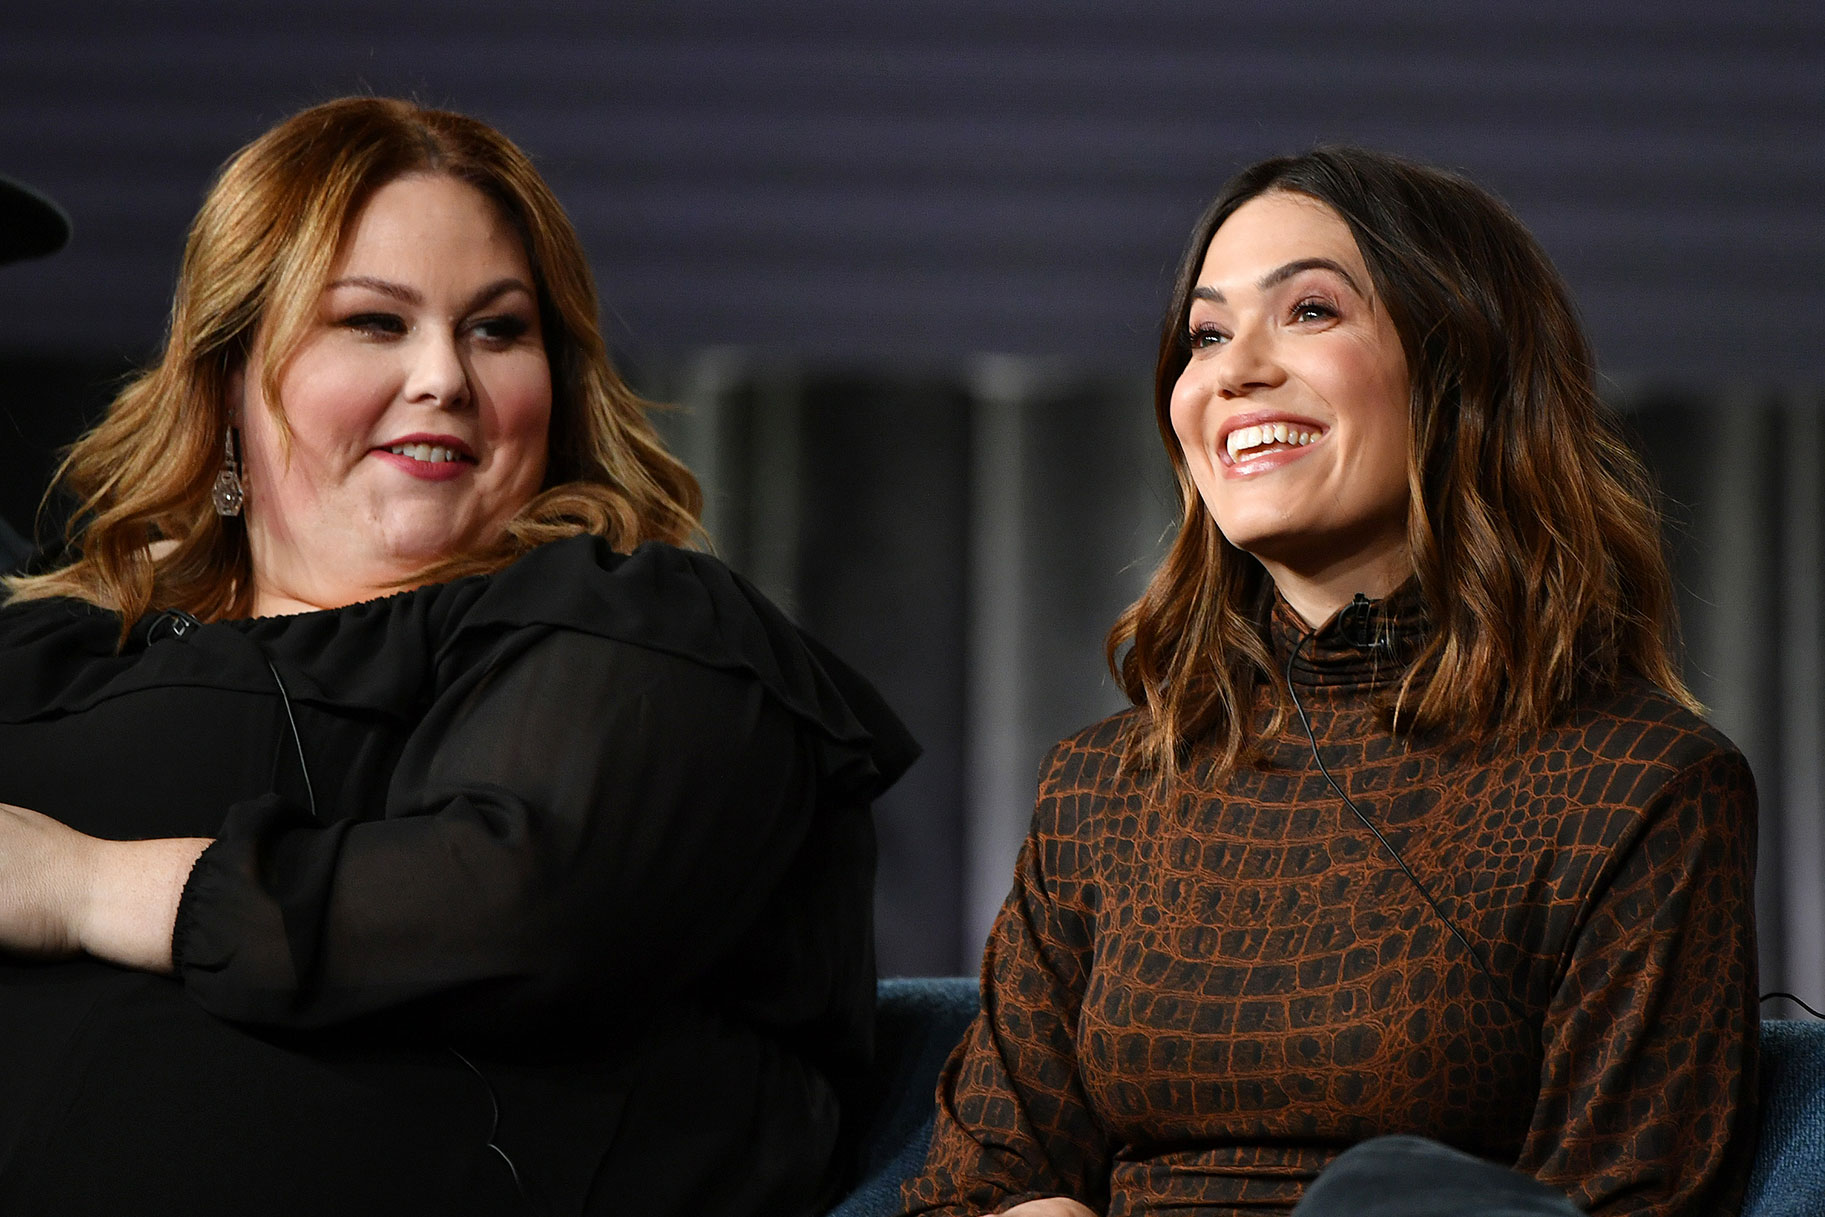 Chrissy Metz and Mandy Moore seated together, smiling